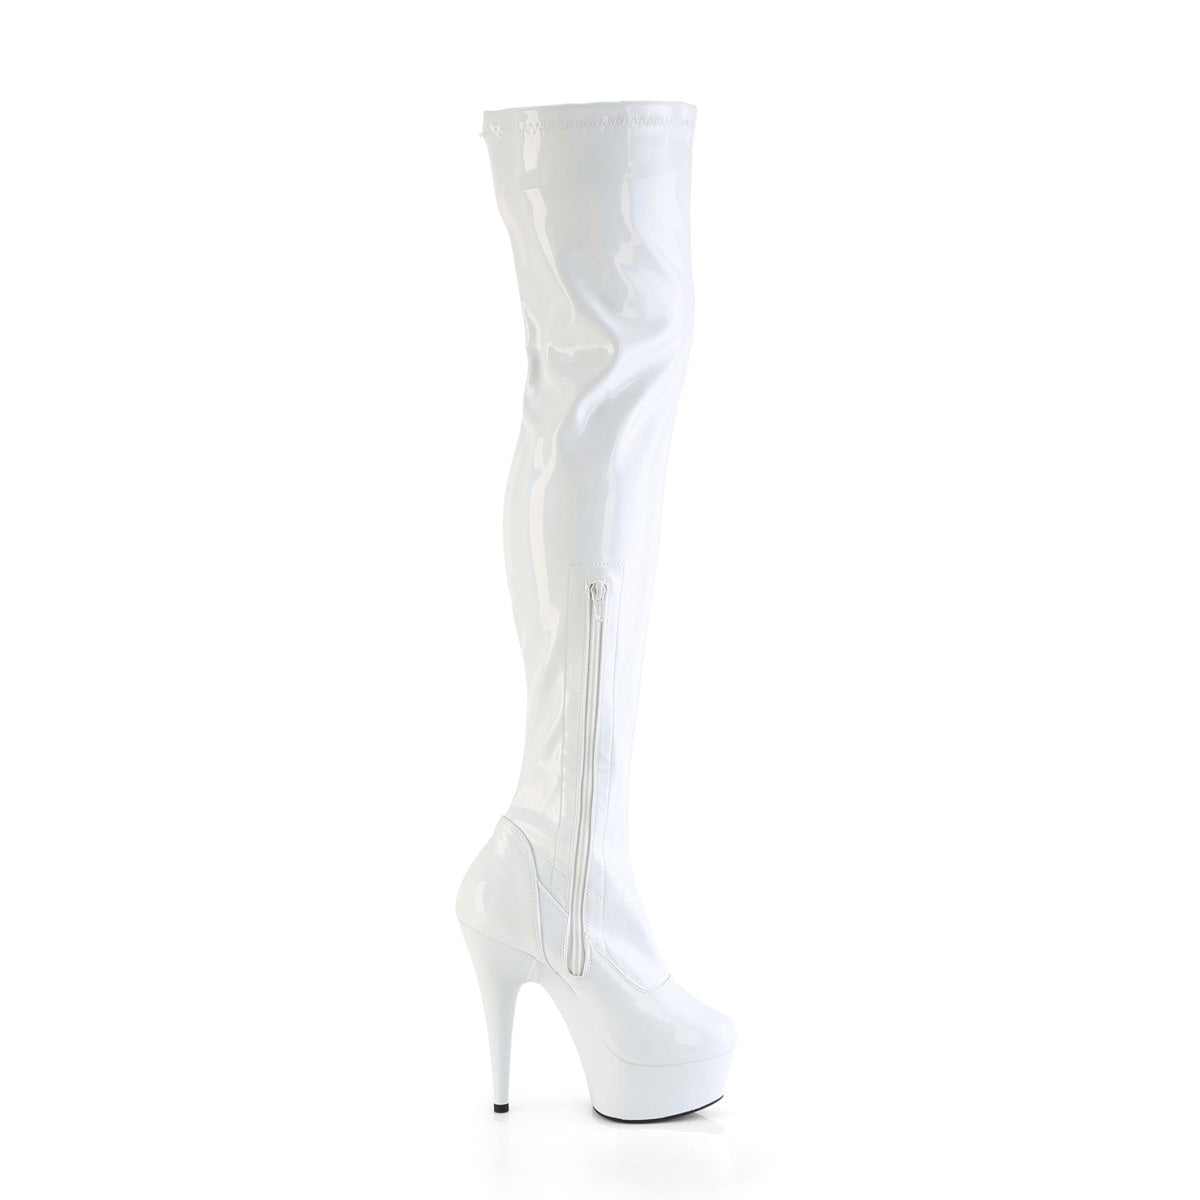 DELIGHT-3000HWR Pleaser White Hologram Patent Platform Shoes [Thigh High Boots]